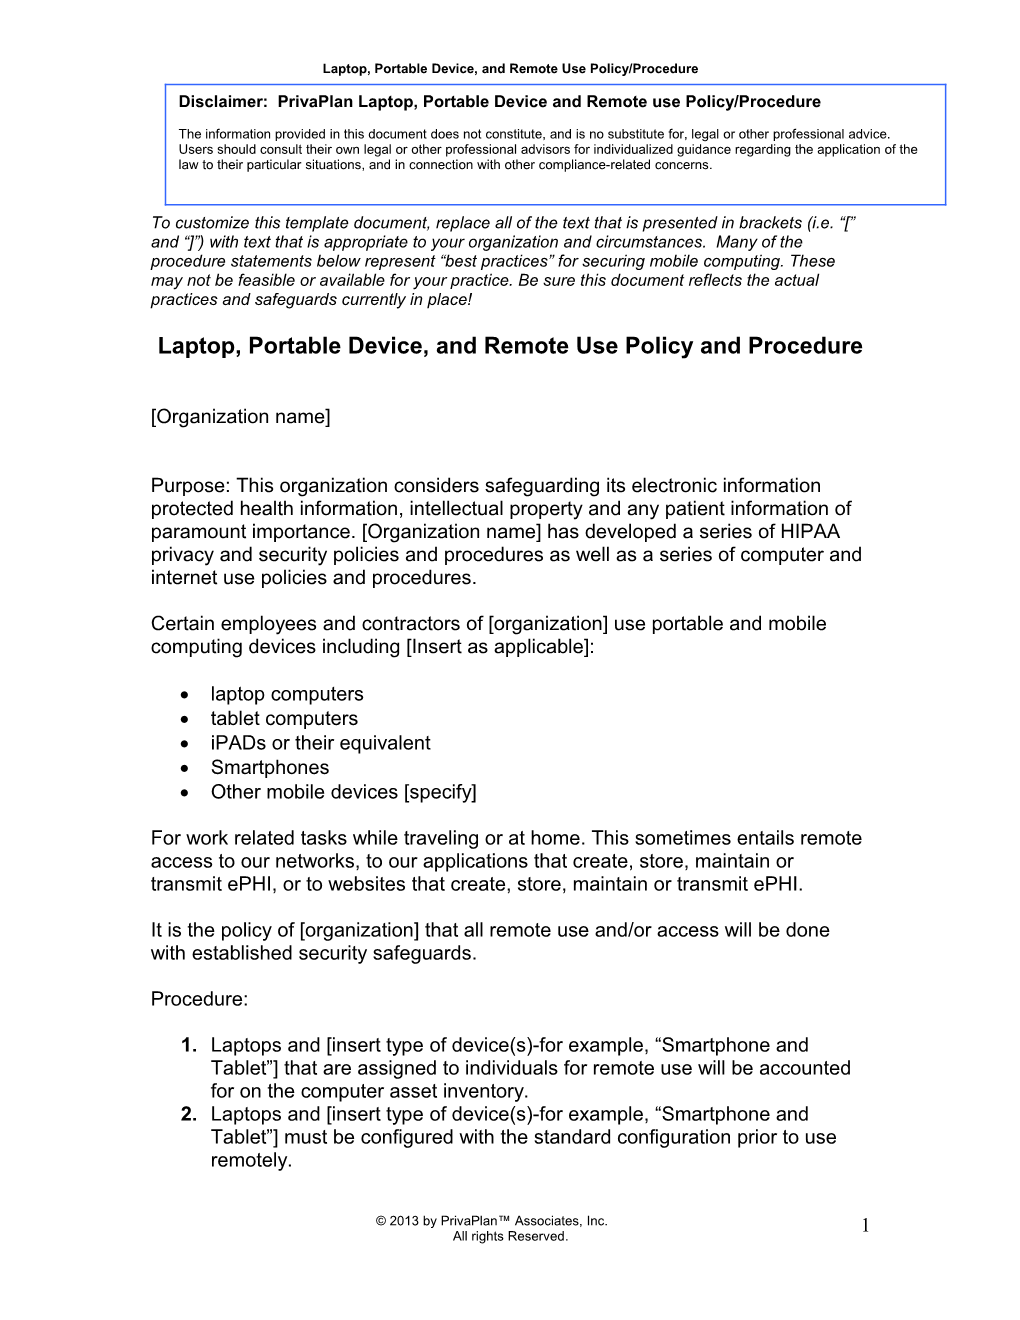 Laptop and Remote Device Policy and Procedure